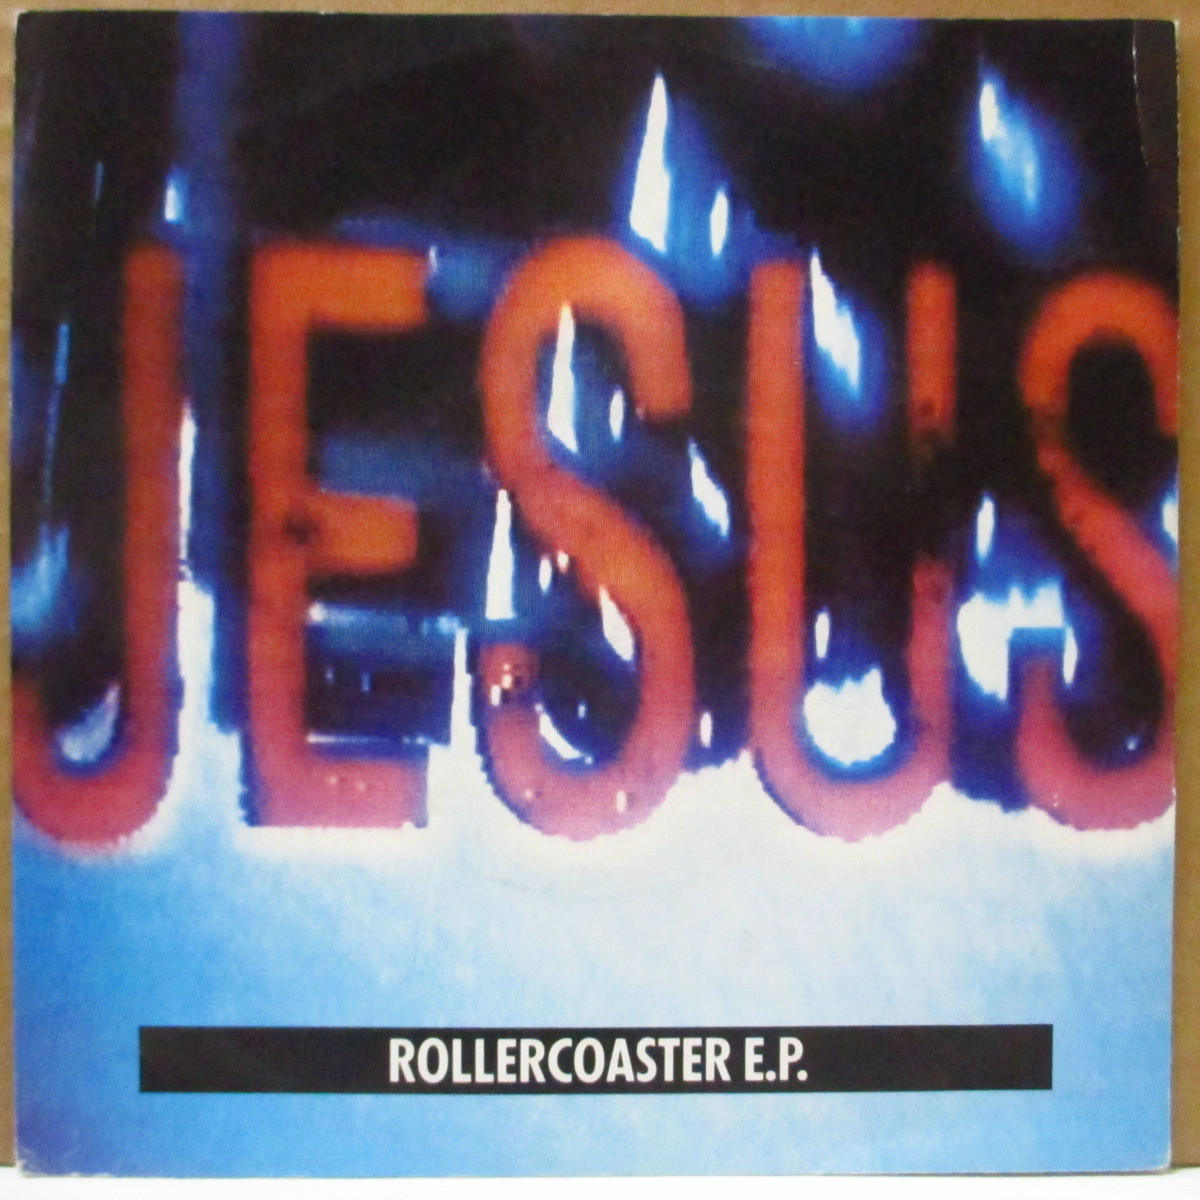 JESUS AND MARY CHAIN， THE-Rollercoaster E.P. (EU オリジナル 7インチ+_画像1